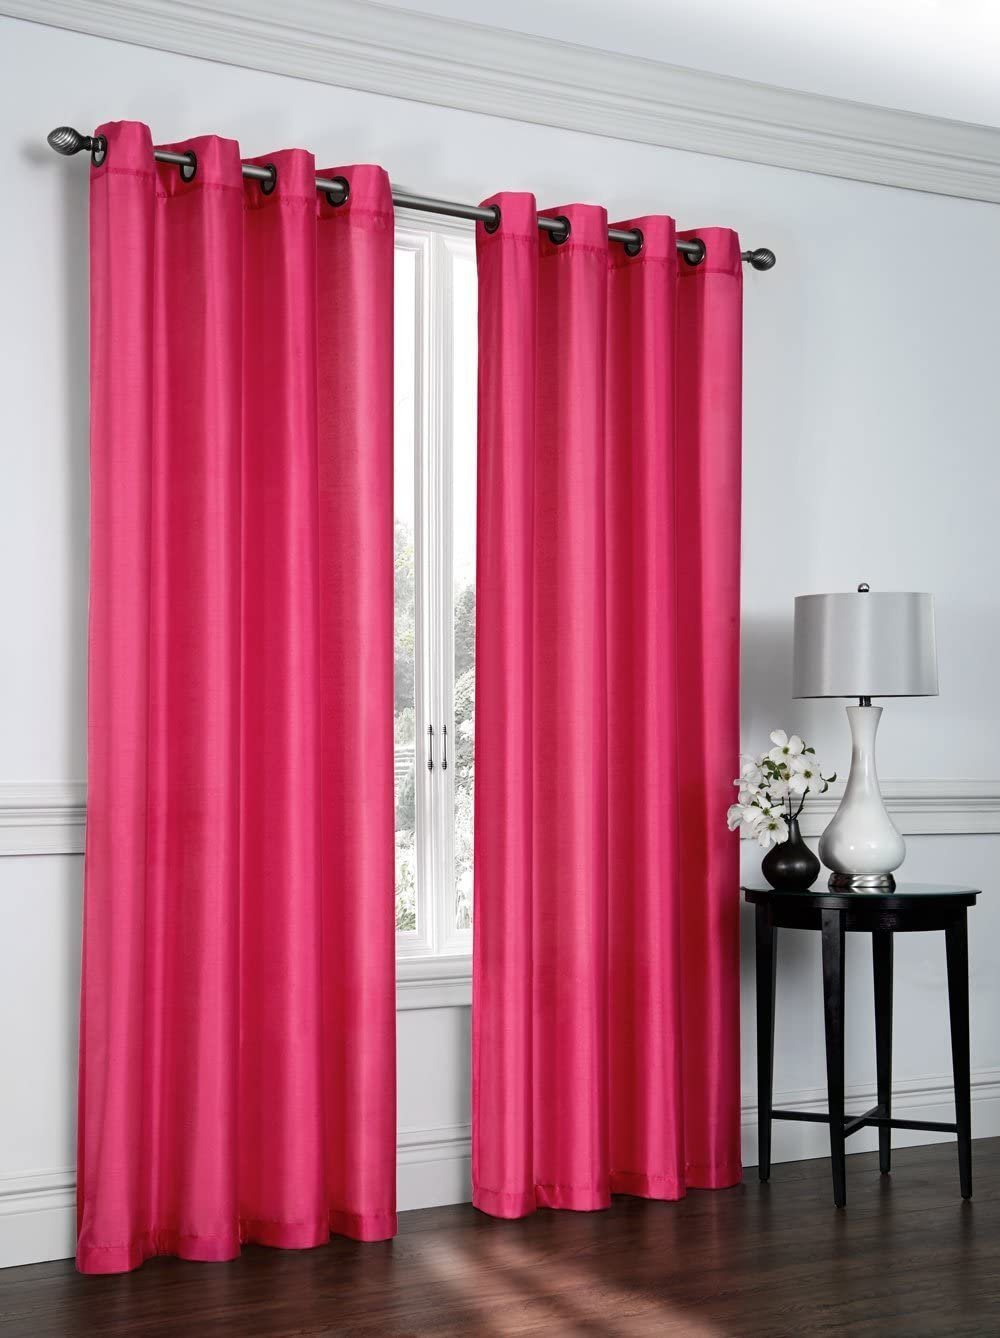 Ruthy's Textile 2 - Piece Semi Sheer Faux Silk Grommet Curtains Window Panels for Home Living Room/Bedroom - 54" by 84" Inch Long - Red